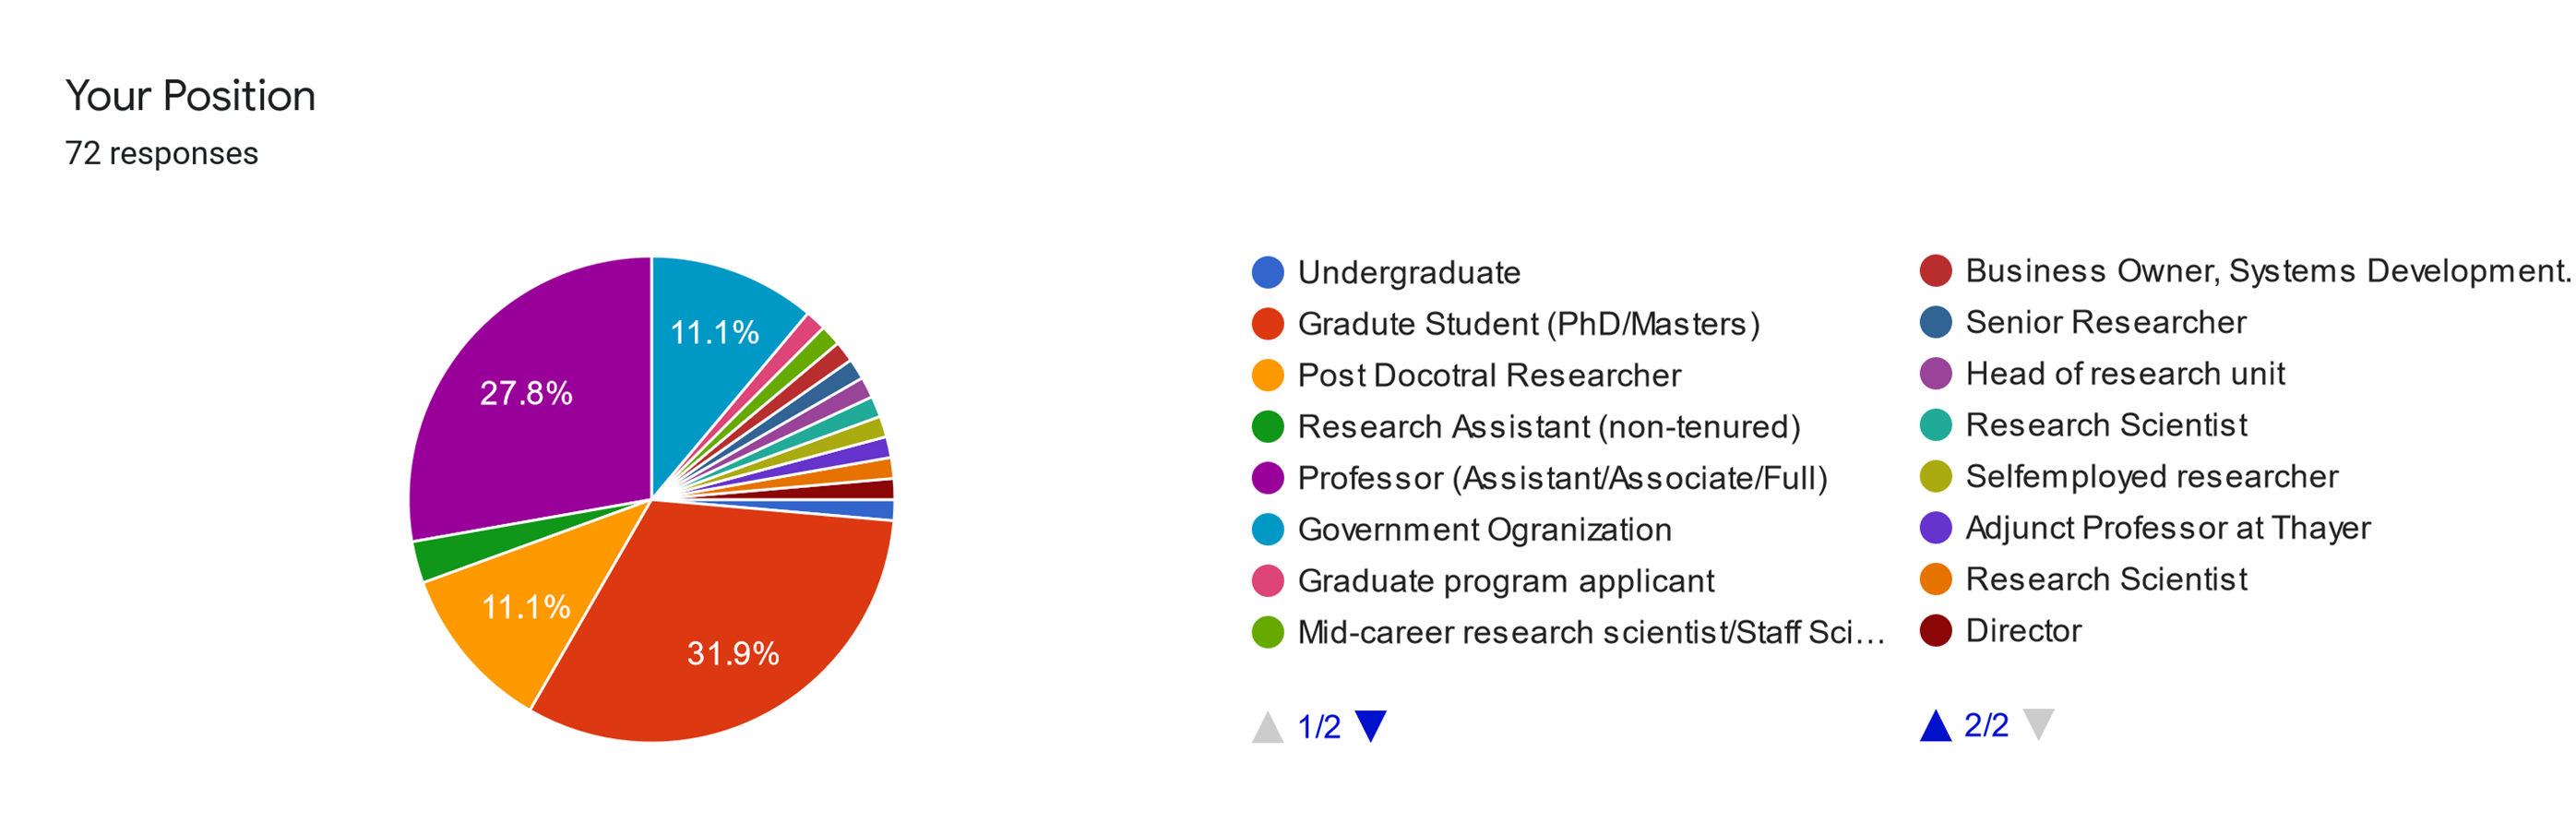 This pie chart show results from a survey asking the professional background of each participant. 31.9% of participants are graduate students, 27.8% are professors, 11.1% are from a government organization, 11.1% are post docs, and the remaining participants come from a diverse background in Academia, Government, or Private sectors.